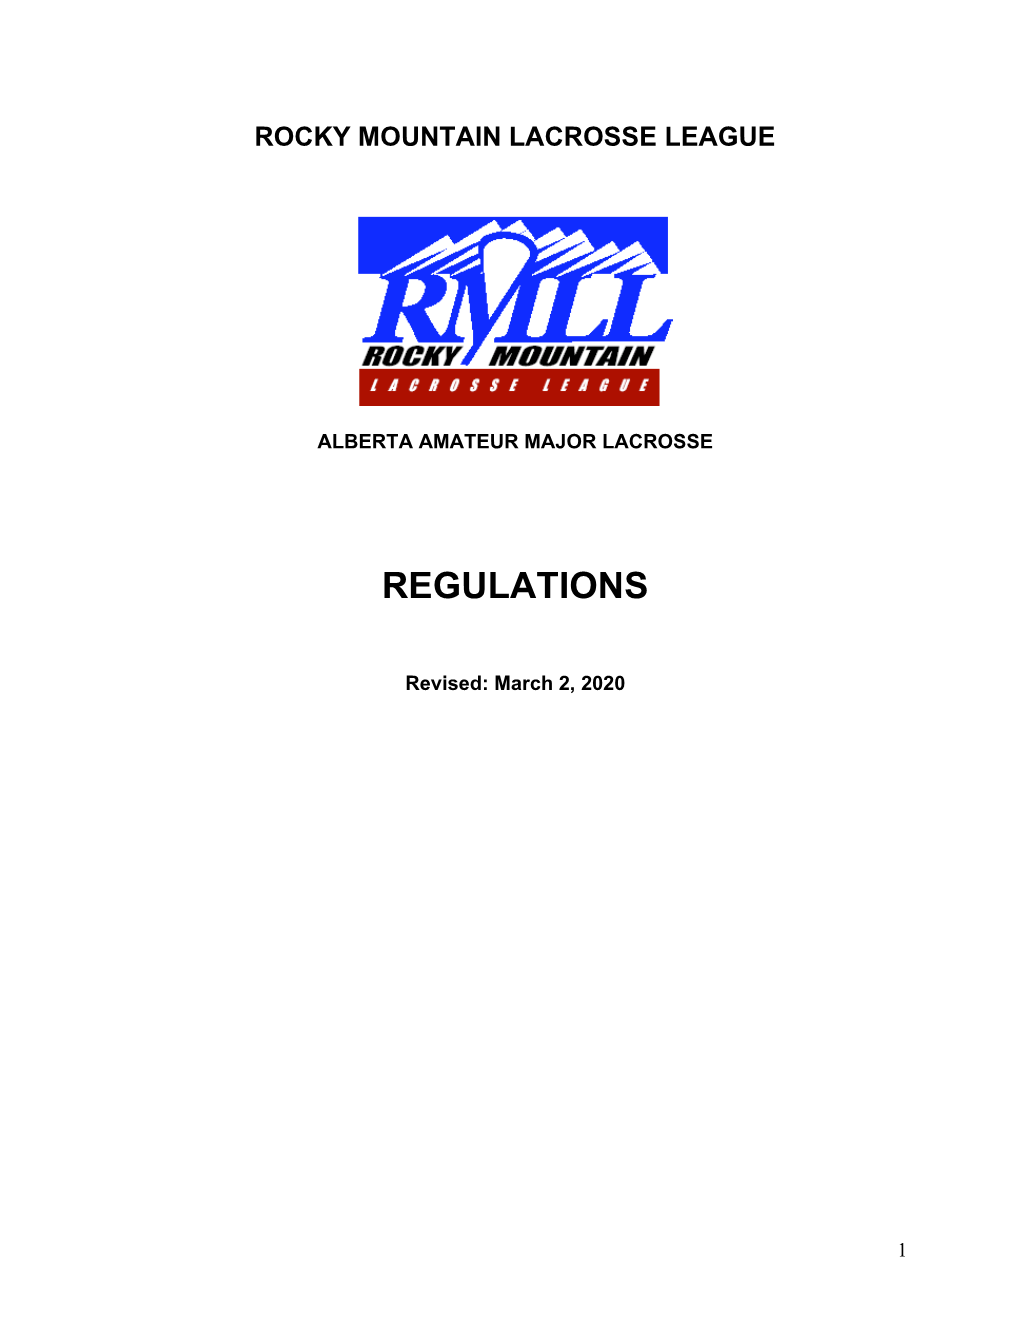 RMLL Regulations Are the General Rules Which Govern All the Divisions Within the RMLL